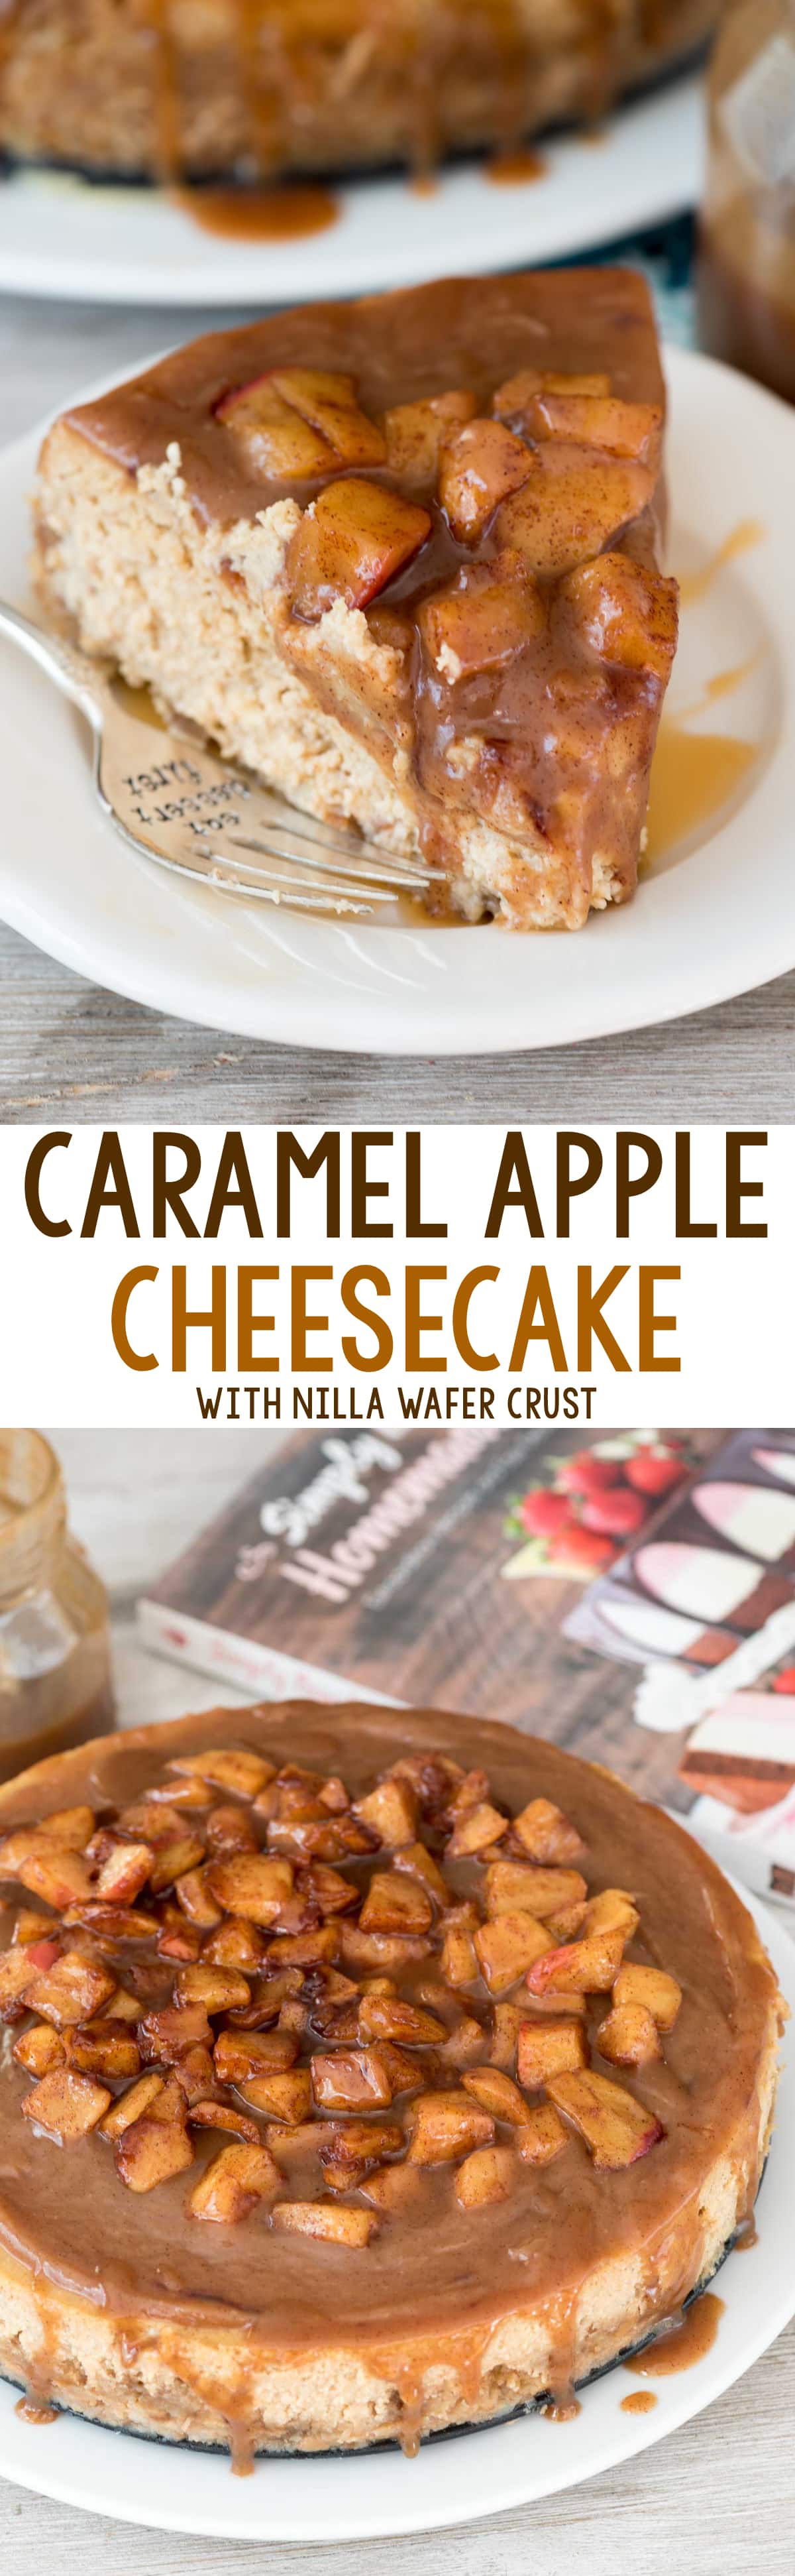 Caramel Apple Cheesecake - this scratch cheesecake recipe is FULL of caramel and apple flavor and has a Nilla Wafer Crust! It's topped with caramel and tons of apples - such a great fall dessert!